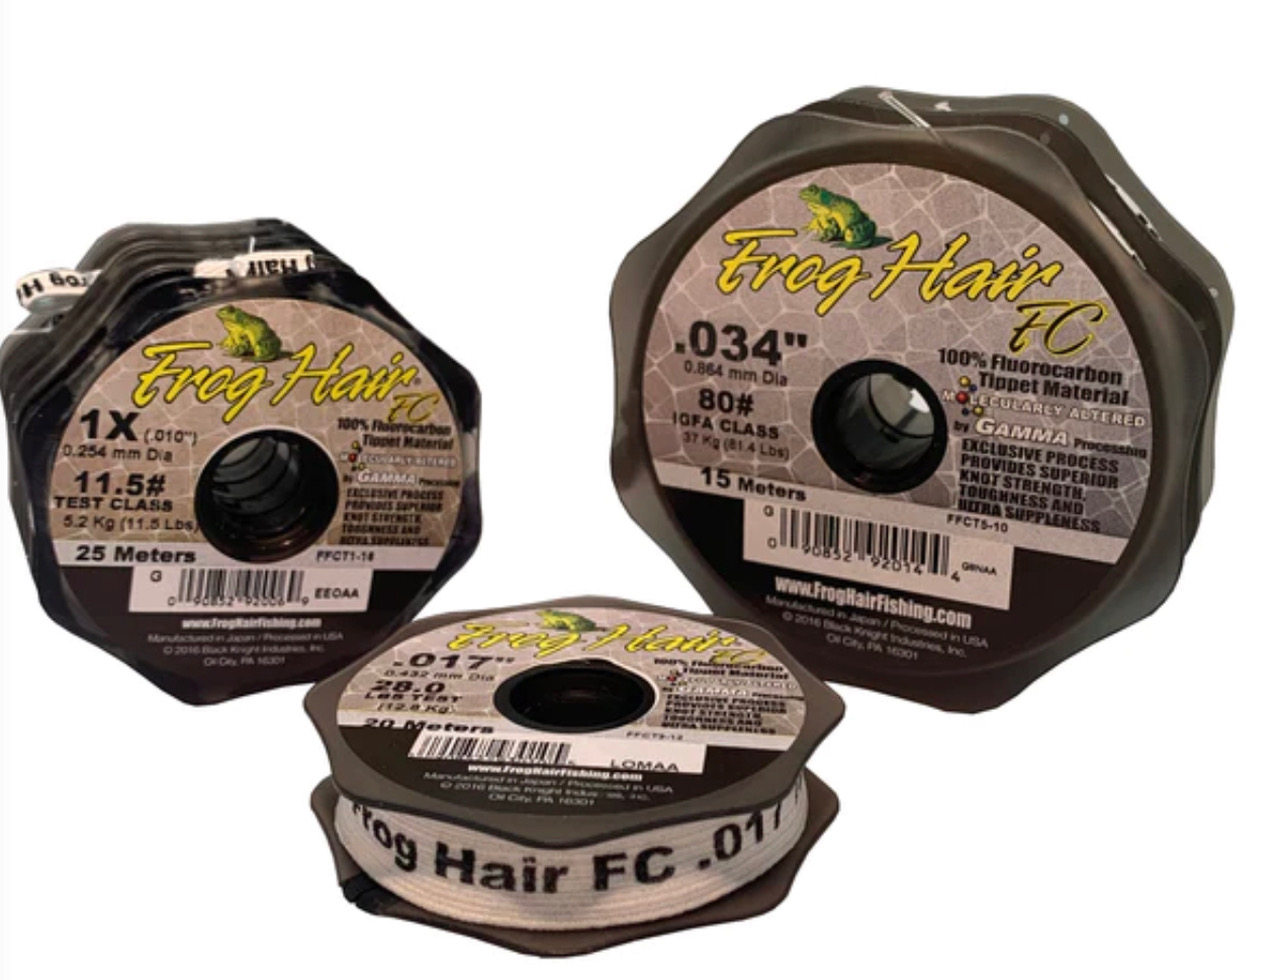 Frog Hair Fluorocarbon Tippet - 100m Guide Spool - 5X - 4.4lb